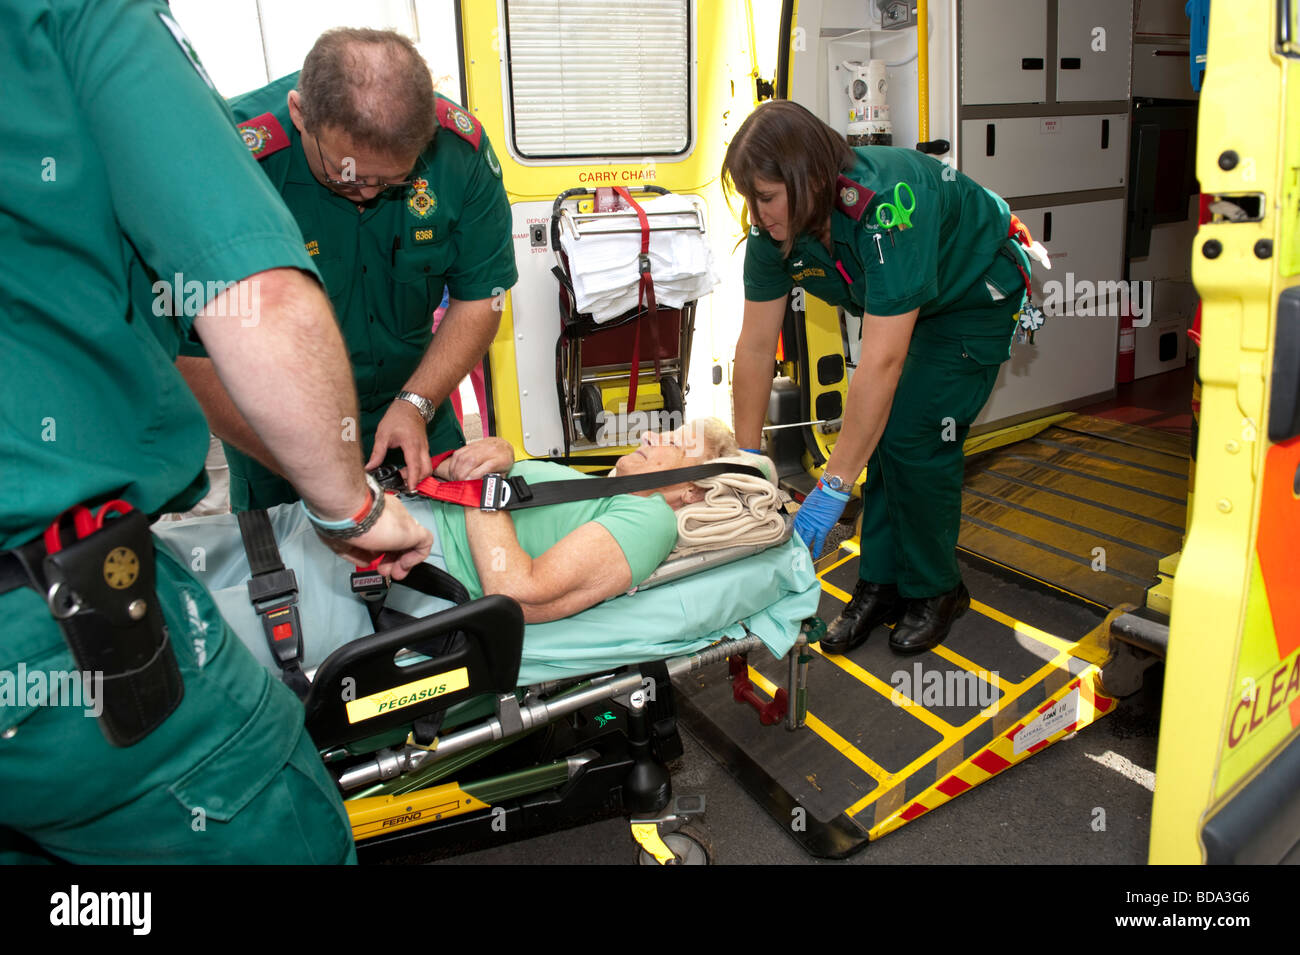 Paramedics responding to a 999 call putting elderly lady who has fallen over at home on a stretcher and taking her to hospital Stock Photo